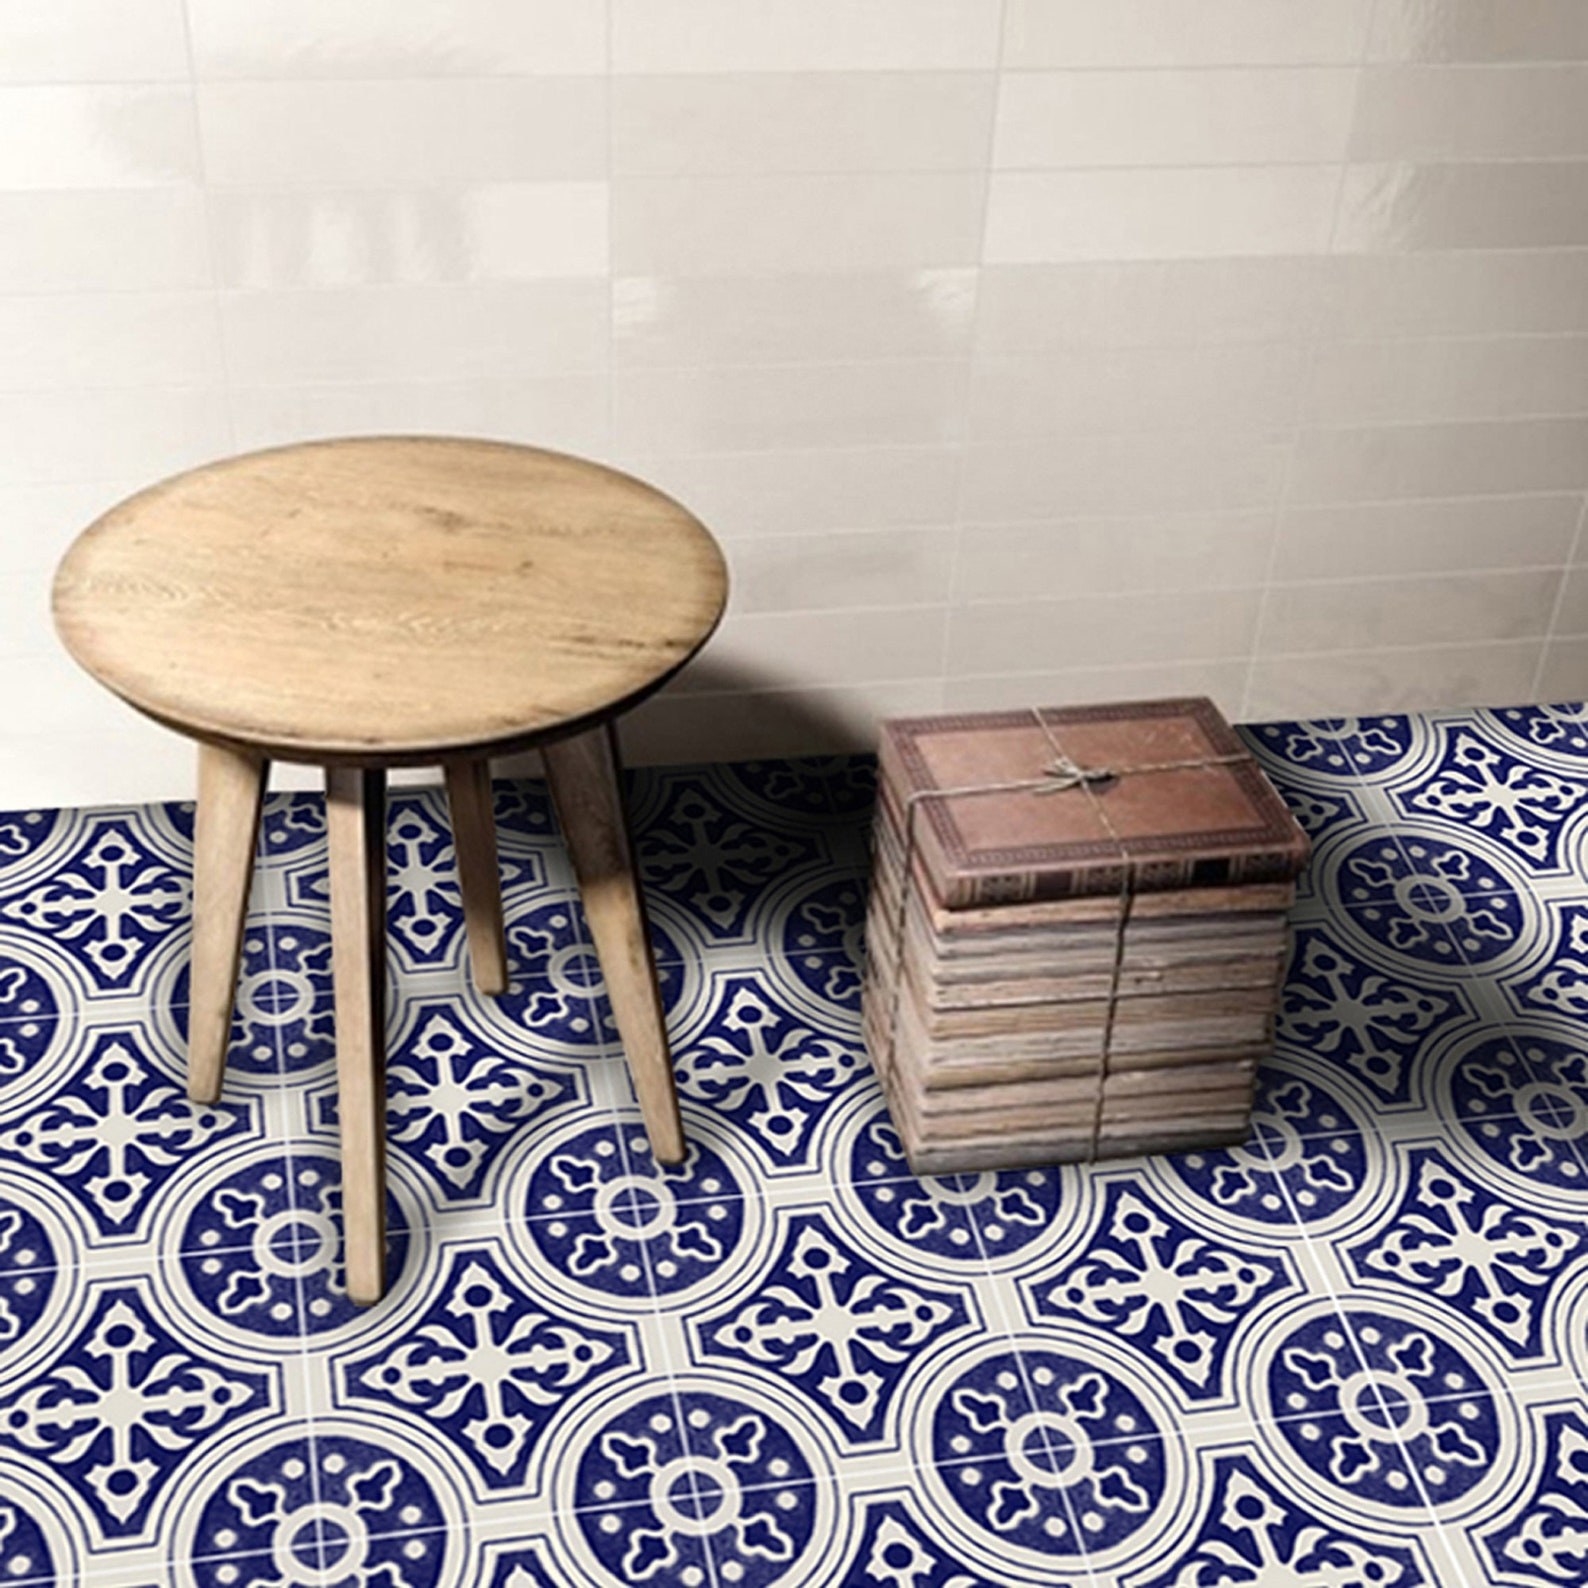 the white and blue Moroccan style tiles